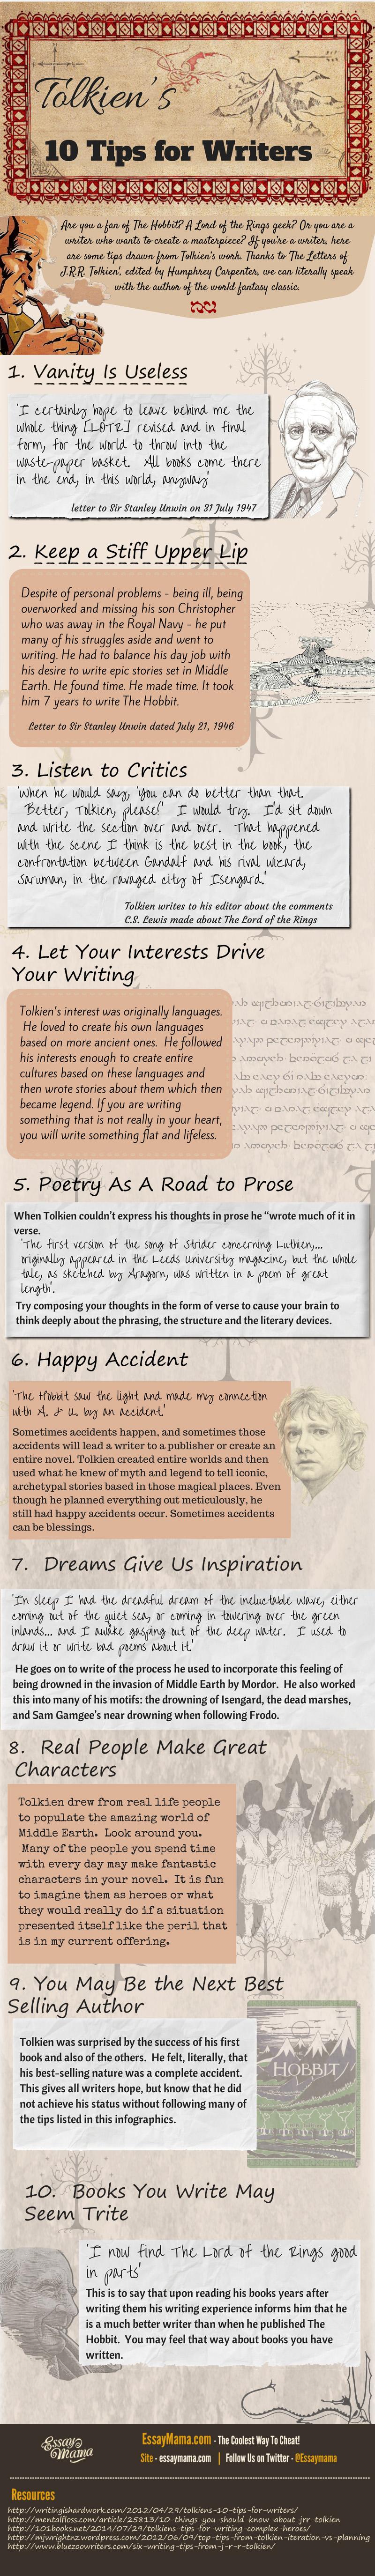 Tolkien’s Writing Tips Infographic